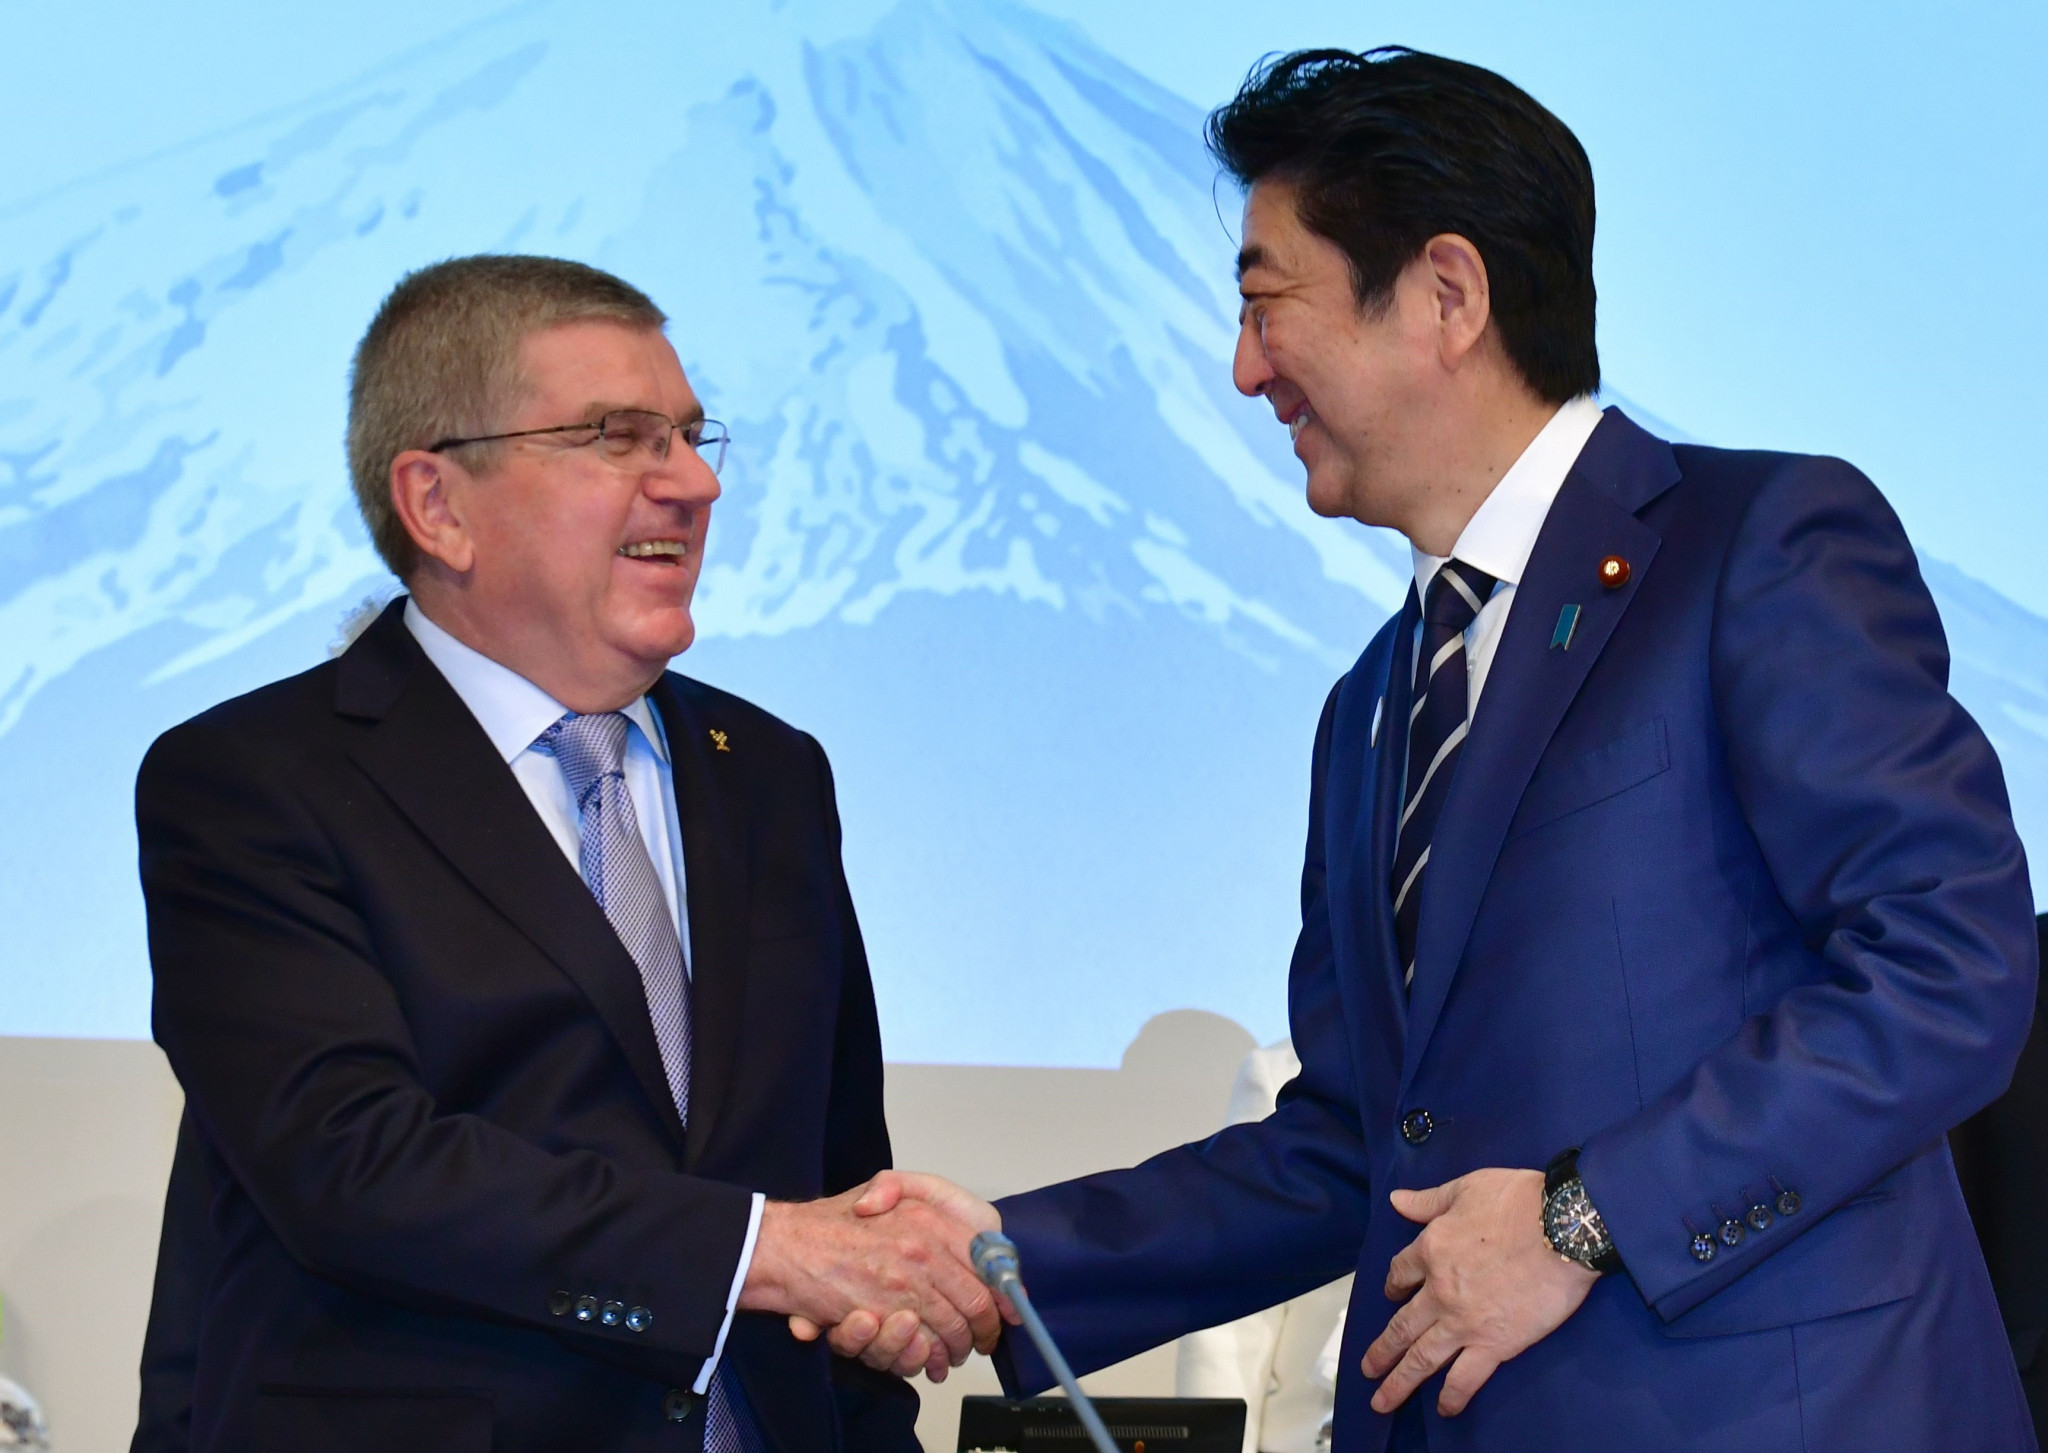 Japanese Prime Minister Shinzō Abe and IOC President Thomas Bach have agreed to a one-year postponement of Tokyo 2020 ©Getty Images